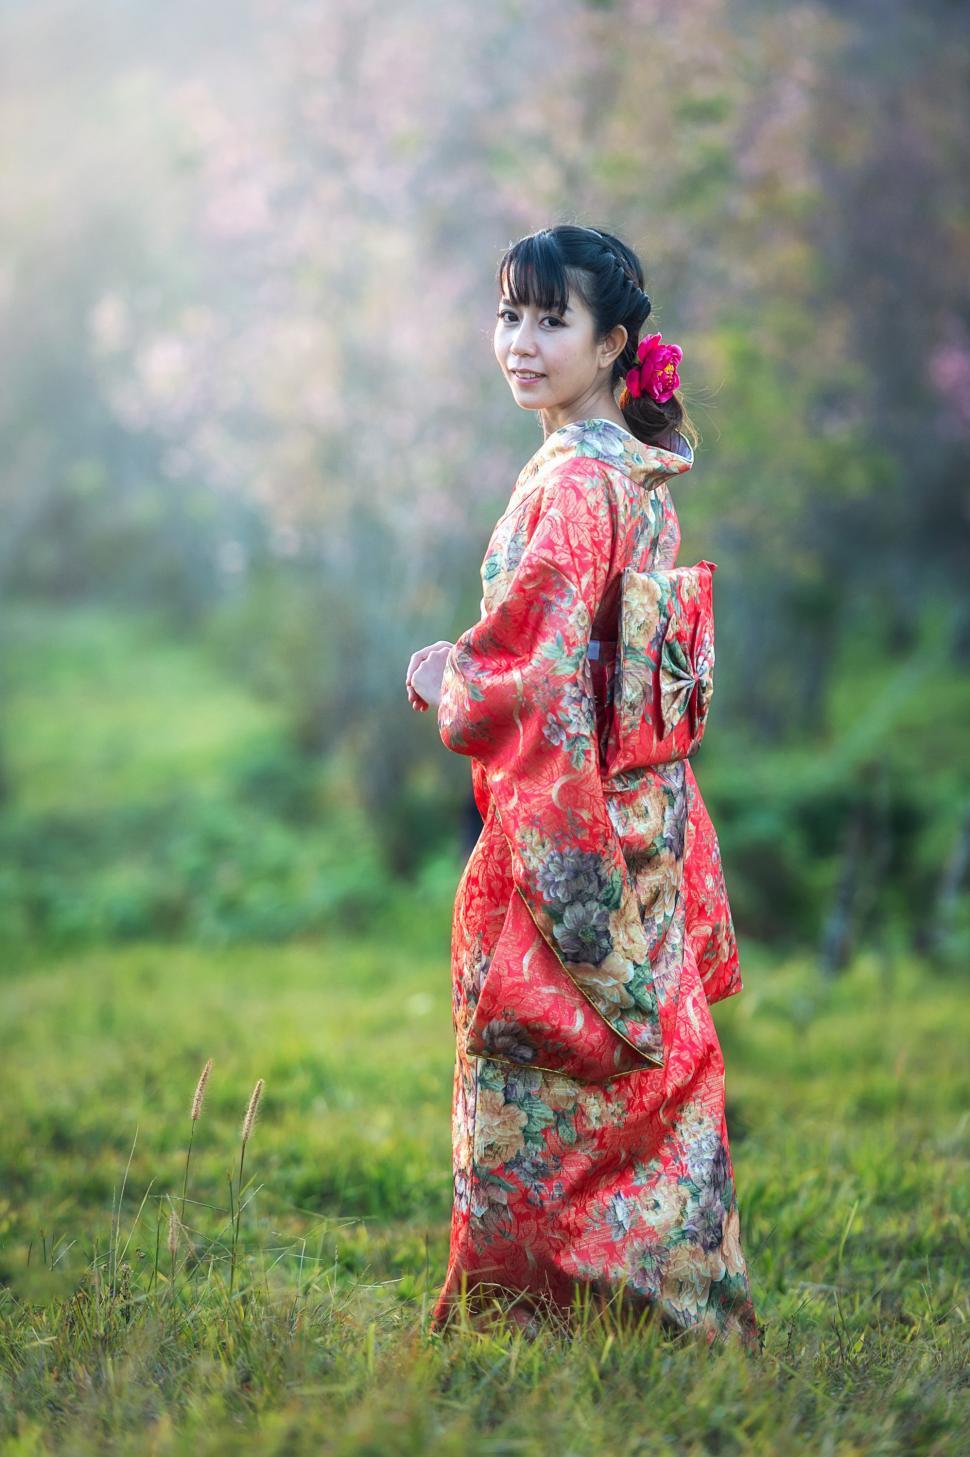 Free Image of Woman in Kimono Standing in Field 